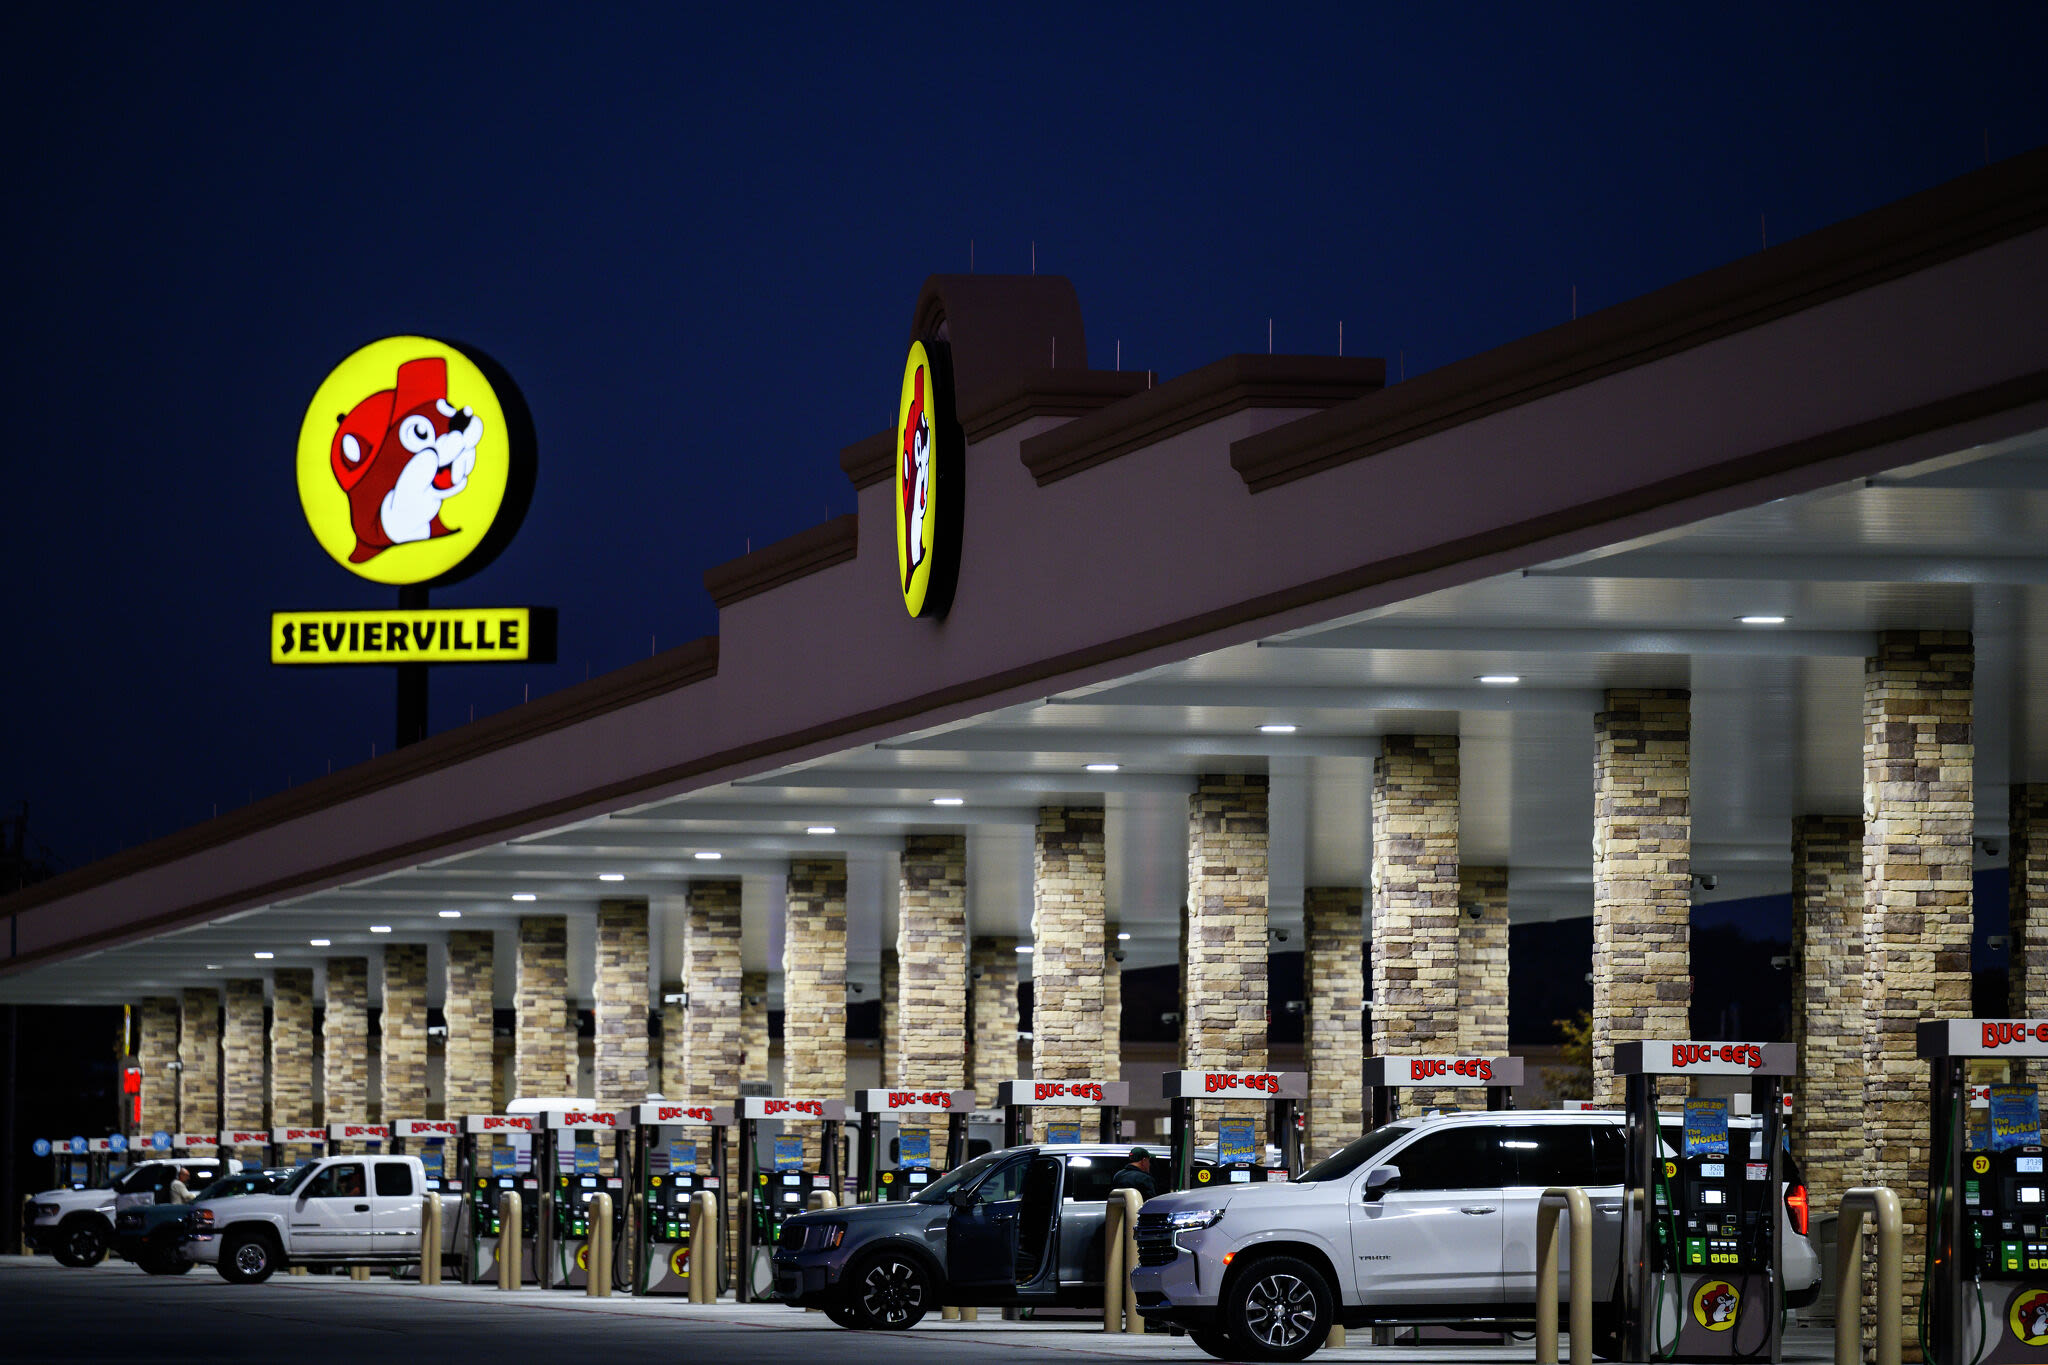 Buc-ee’s isn’t the favorite gas station of America, poll says